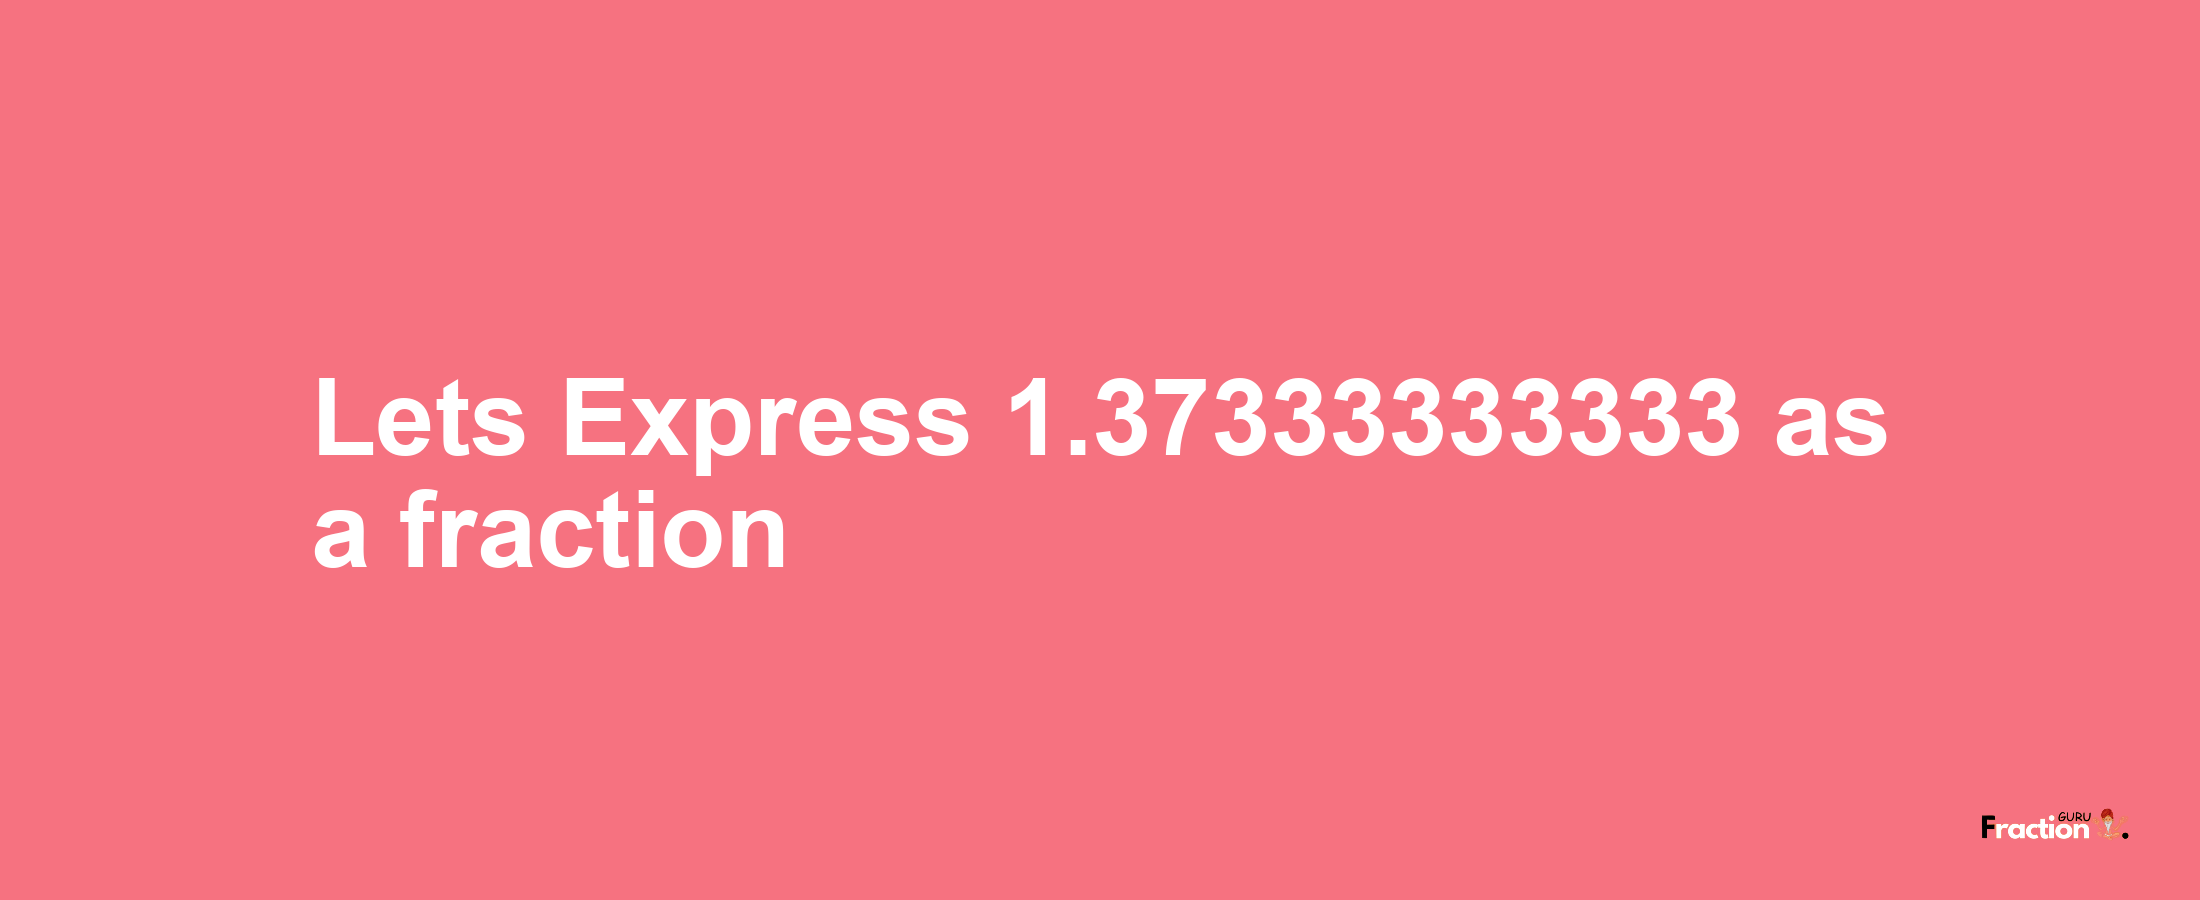 Lets Express 1.37333333333 as afraction